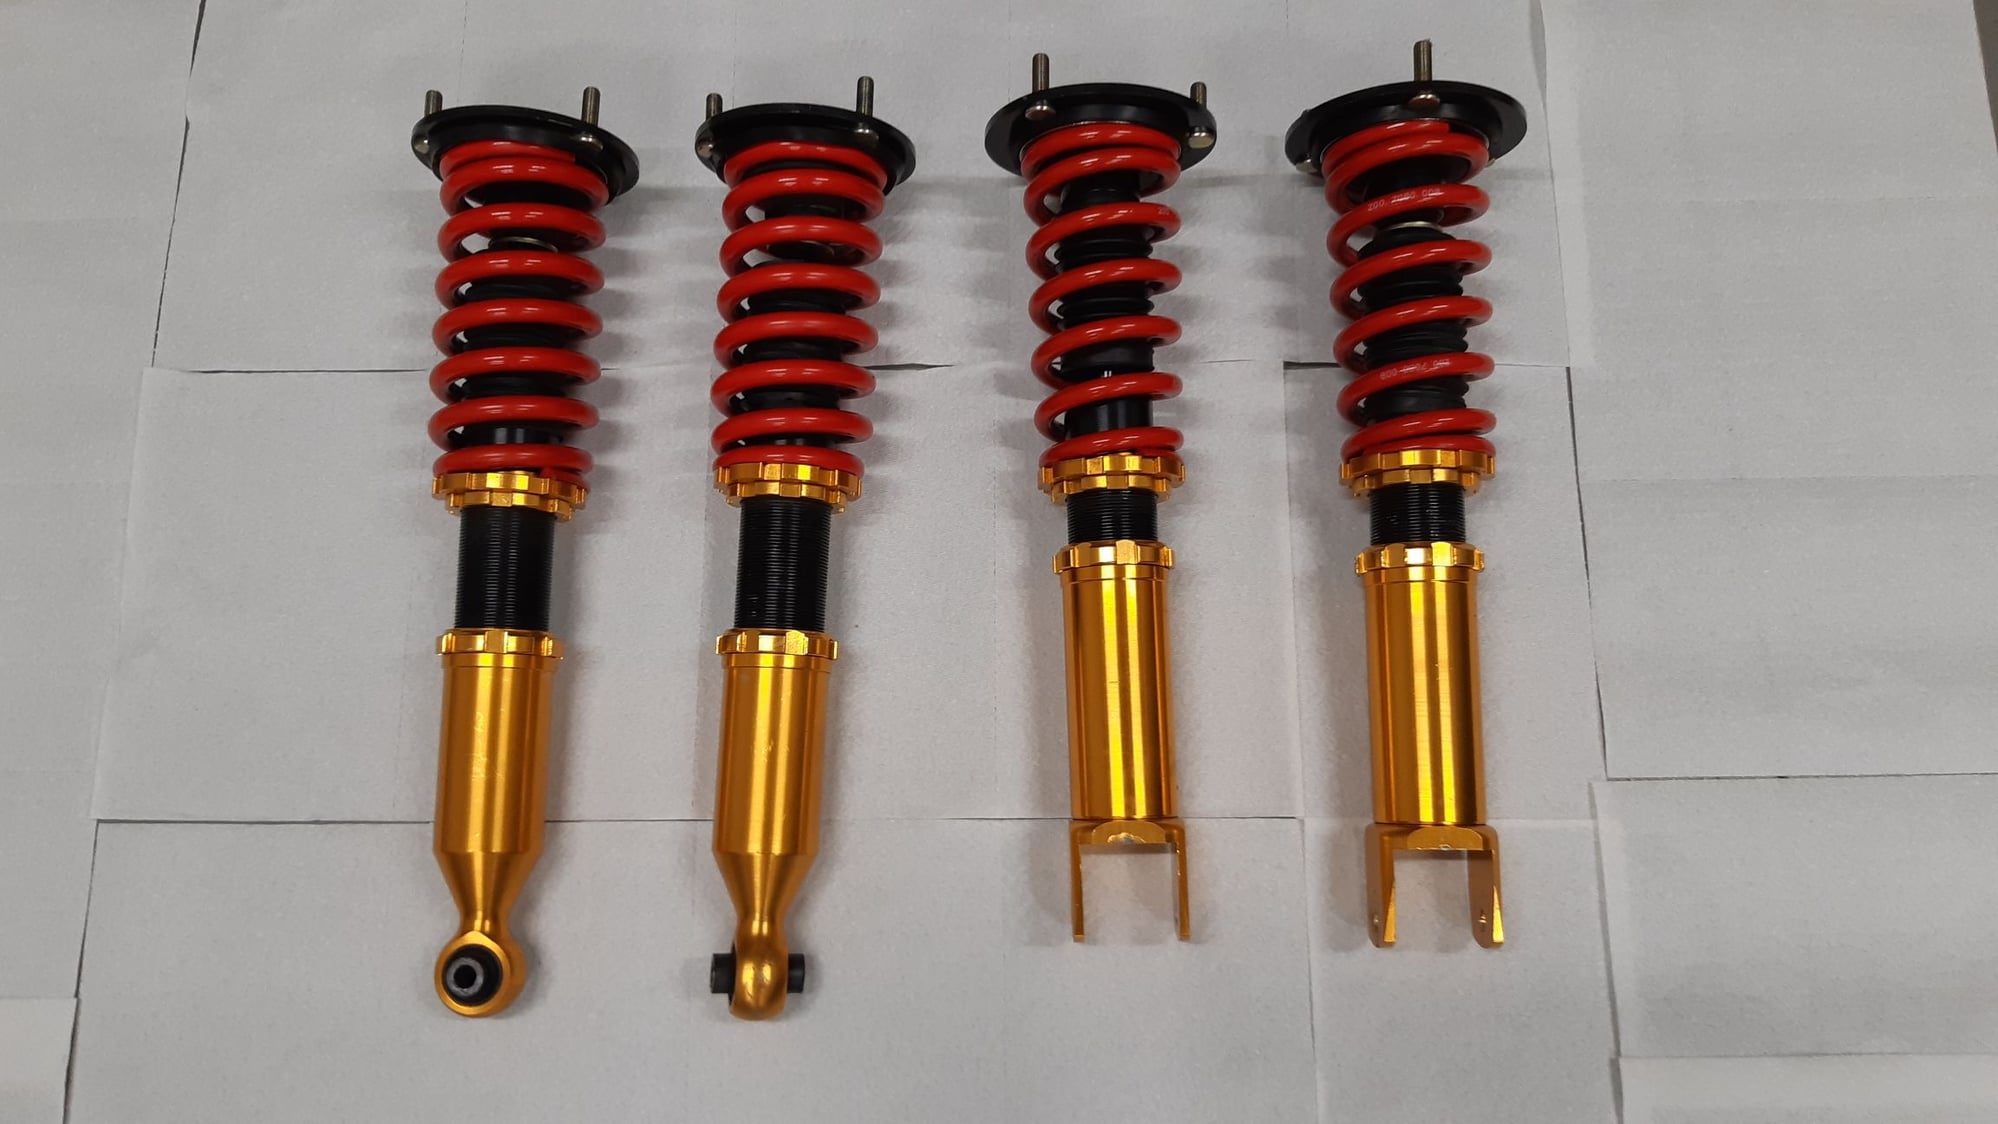 Steering/Suspension - Trak Pro Coilovers Stage II - 10/8 - Price Drop! - Used - 1992 to 1994 Mazda RX-7 - St. Catharines, ON L2S4B5, Canada